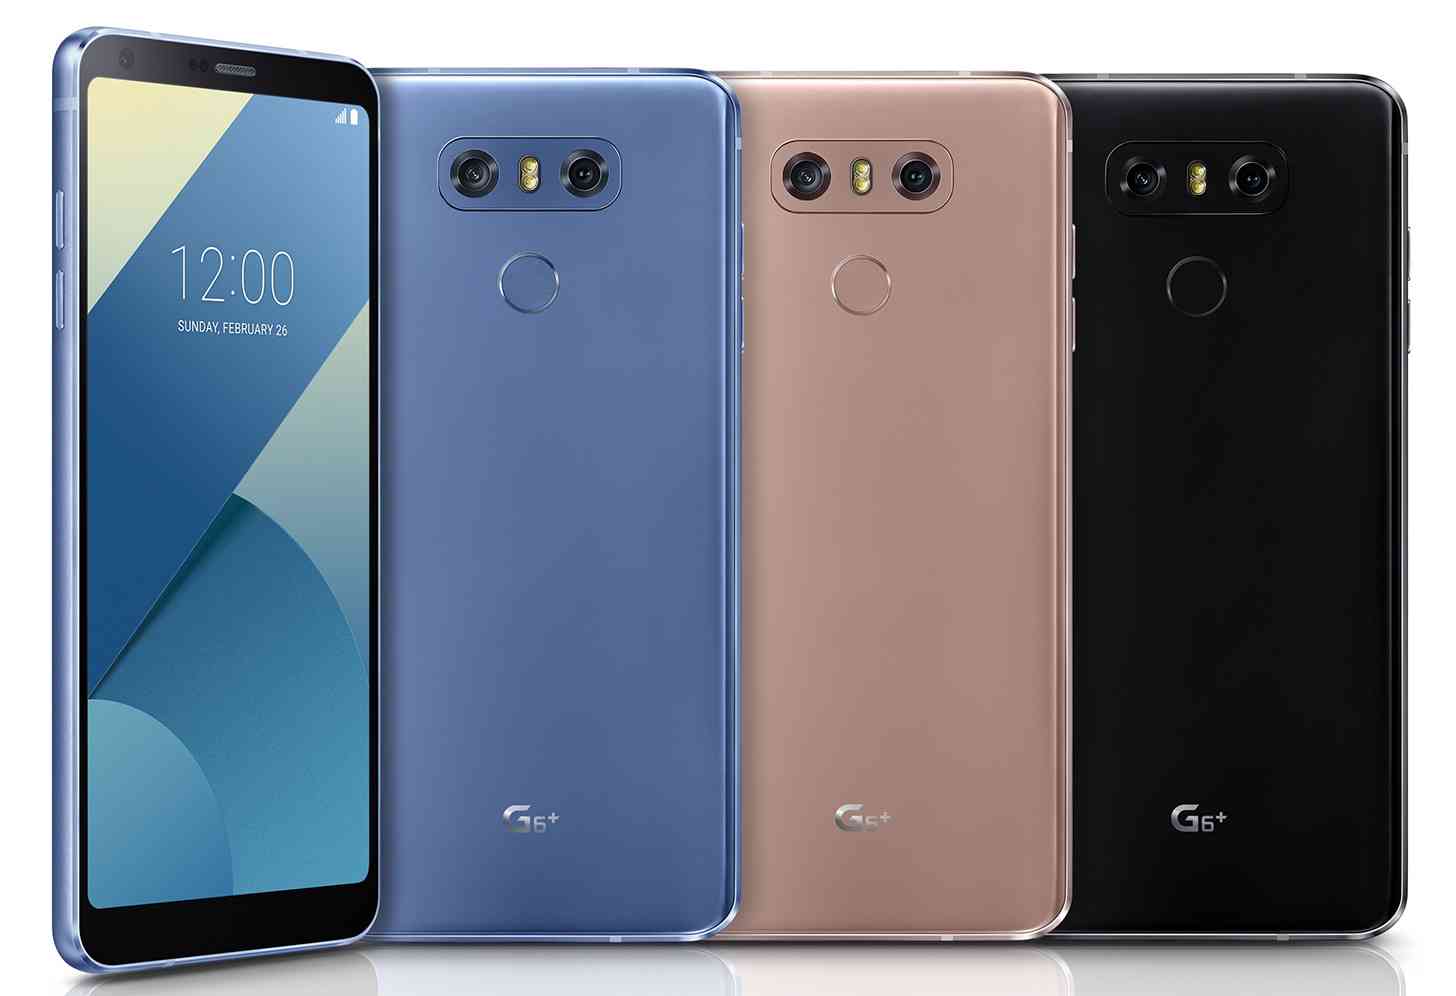 LG G6+ official colors